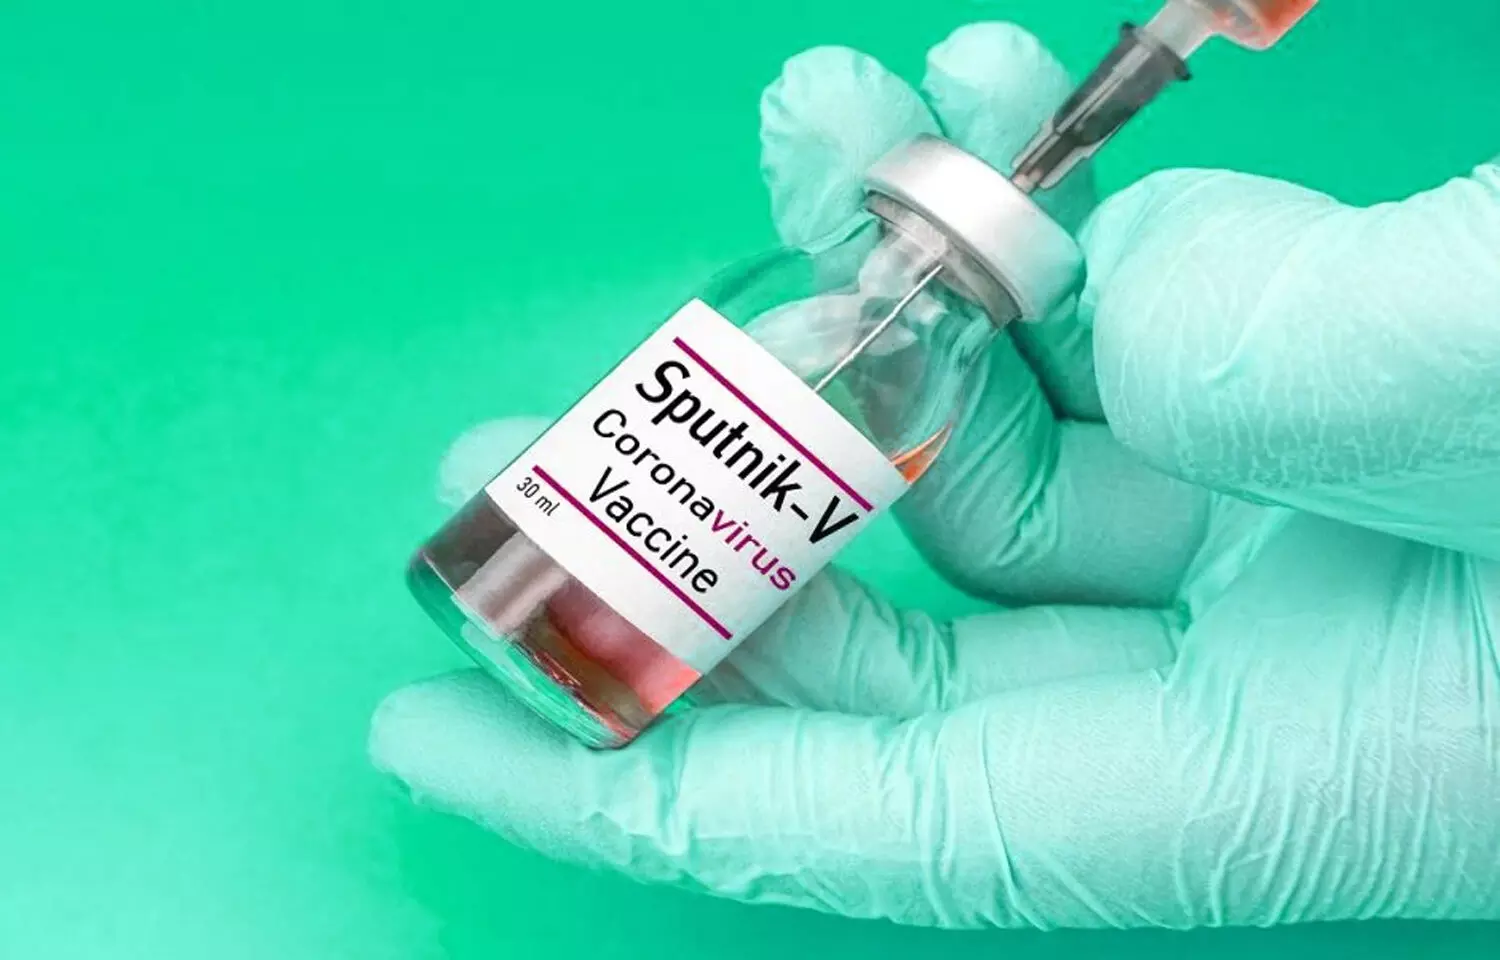 Petition demands Sputnik-V vaccine in COVID-19 vaccination policy, SC says Health Ministry to decide